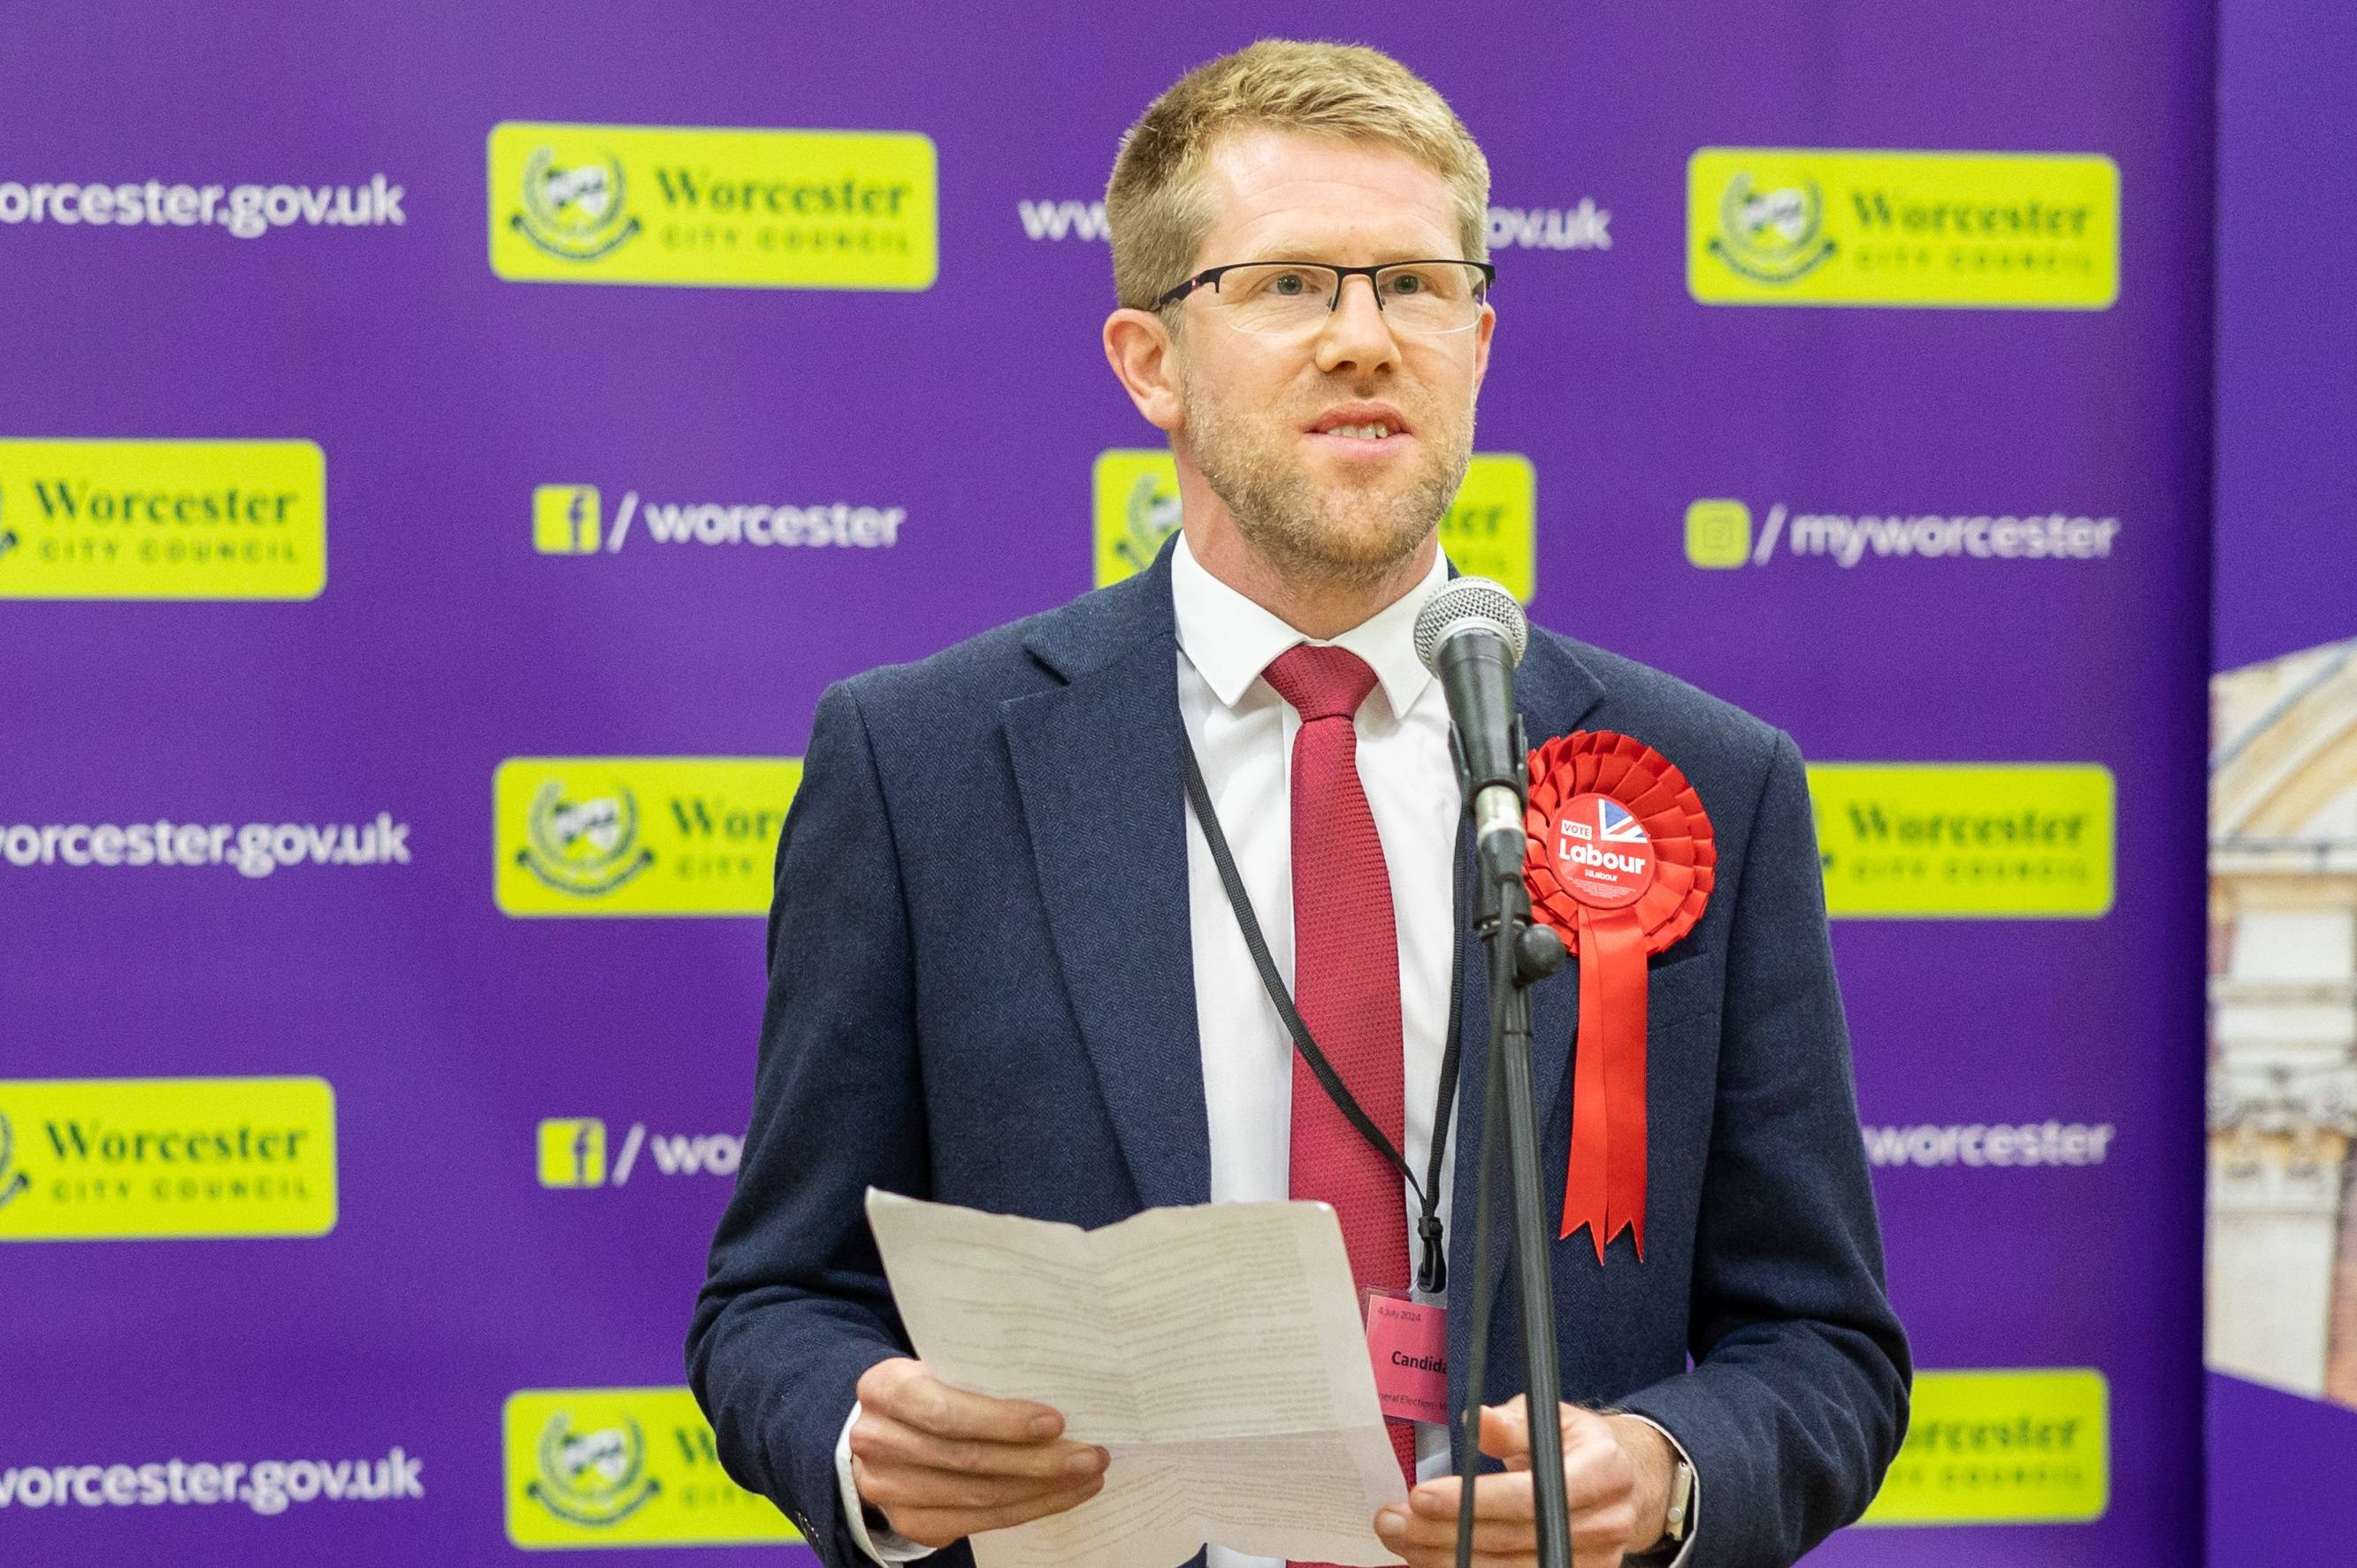 Newly-elected Worcester MP Tom Collins